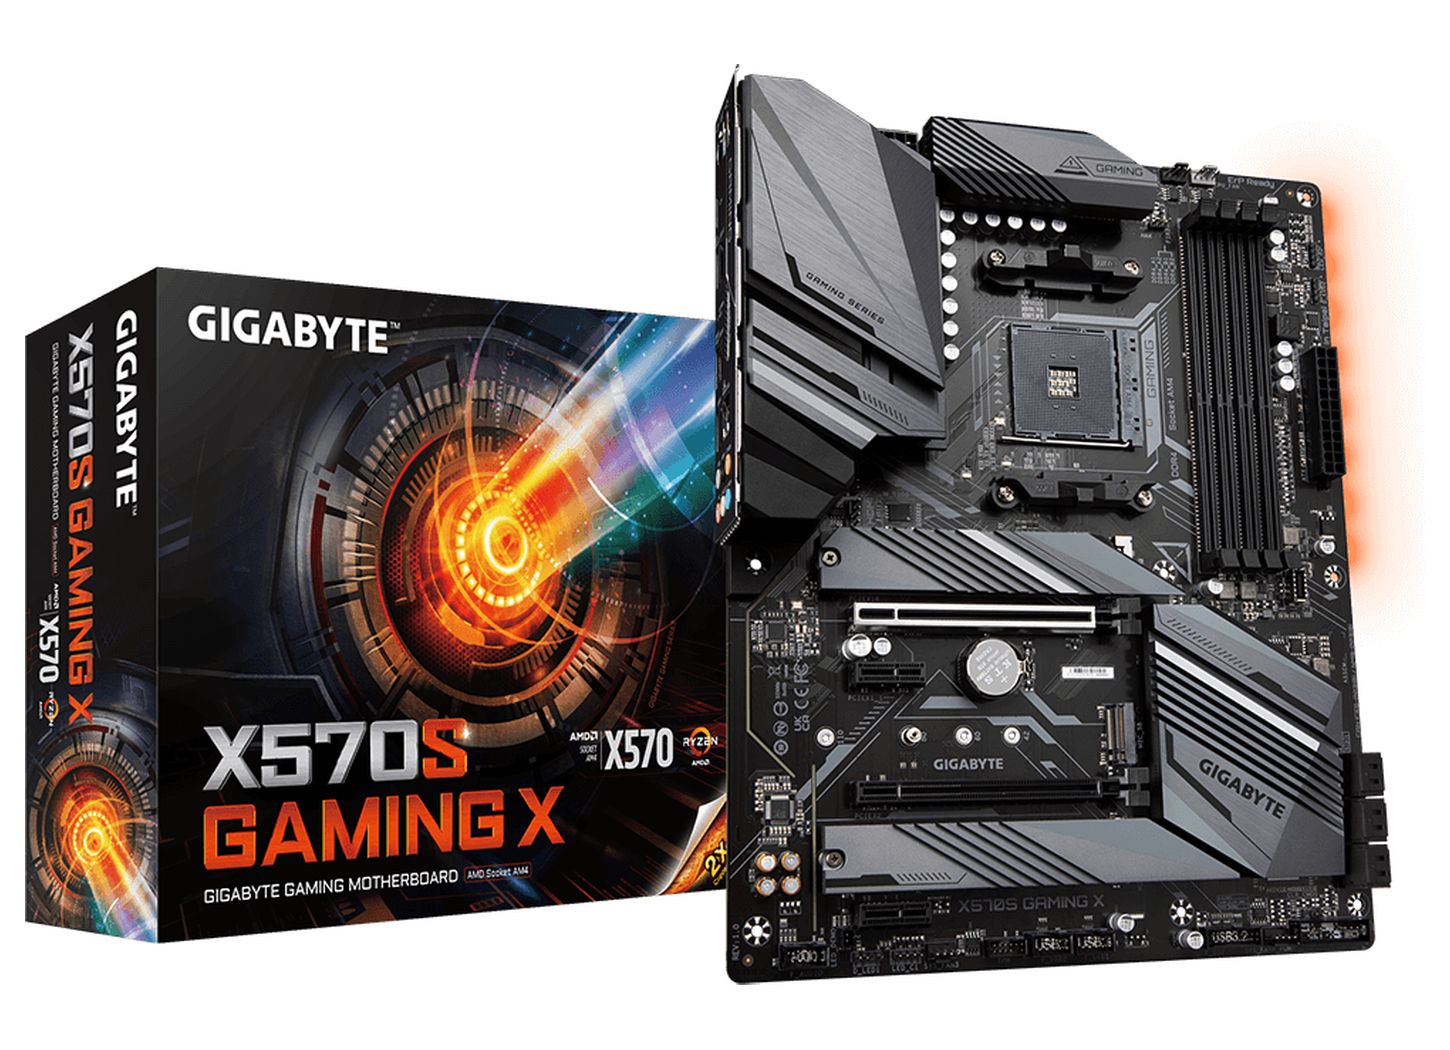 GIGABYTE launches AMD X570S motherboard series with passive chipset